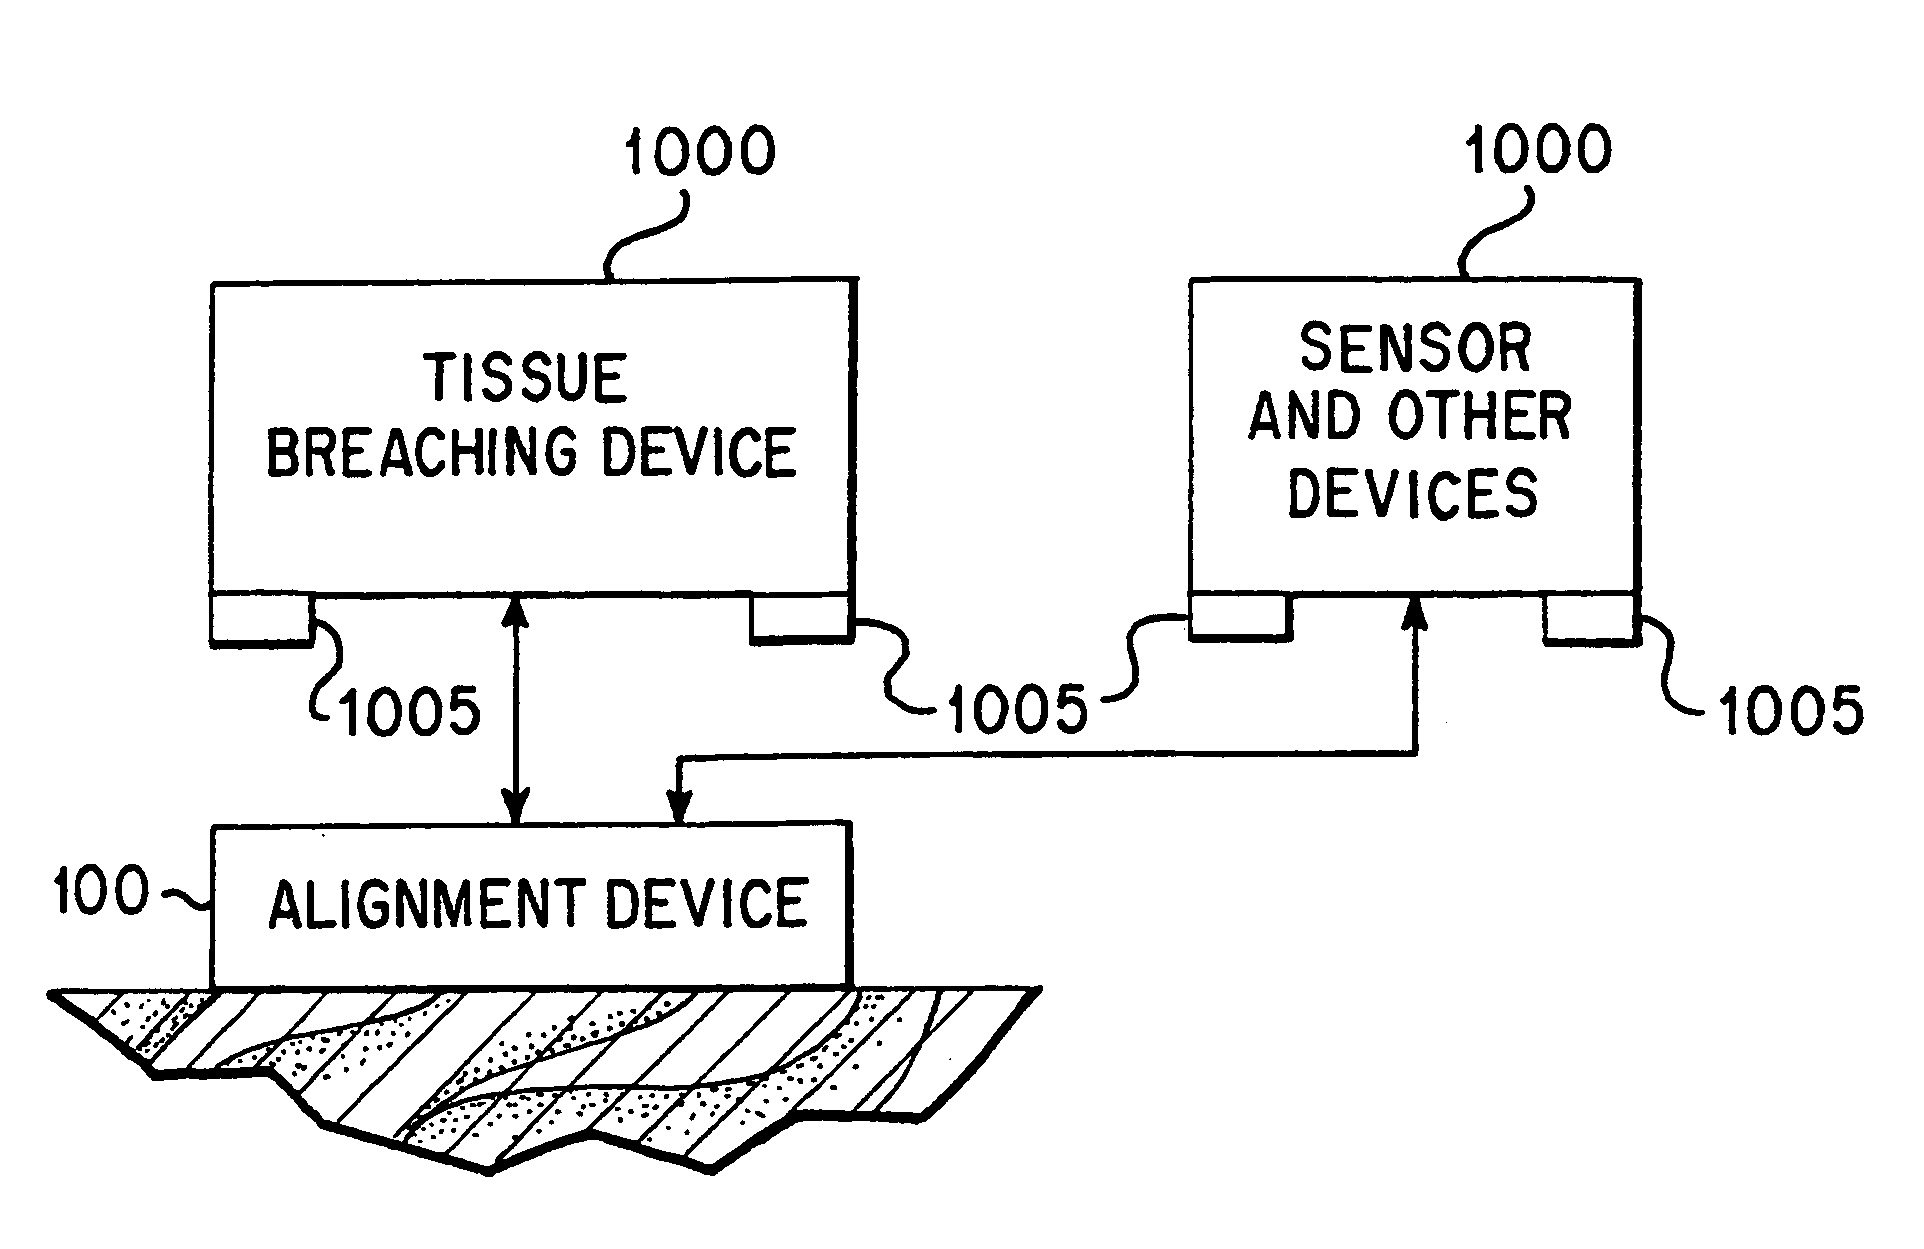 Integrated alignment devices, system, and methods for efficient fluid extraction, substance delivery and other applications